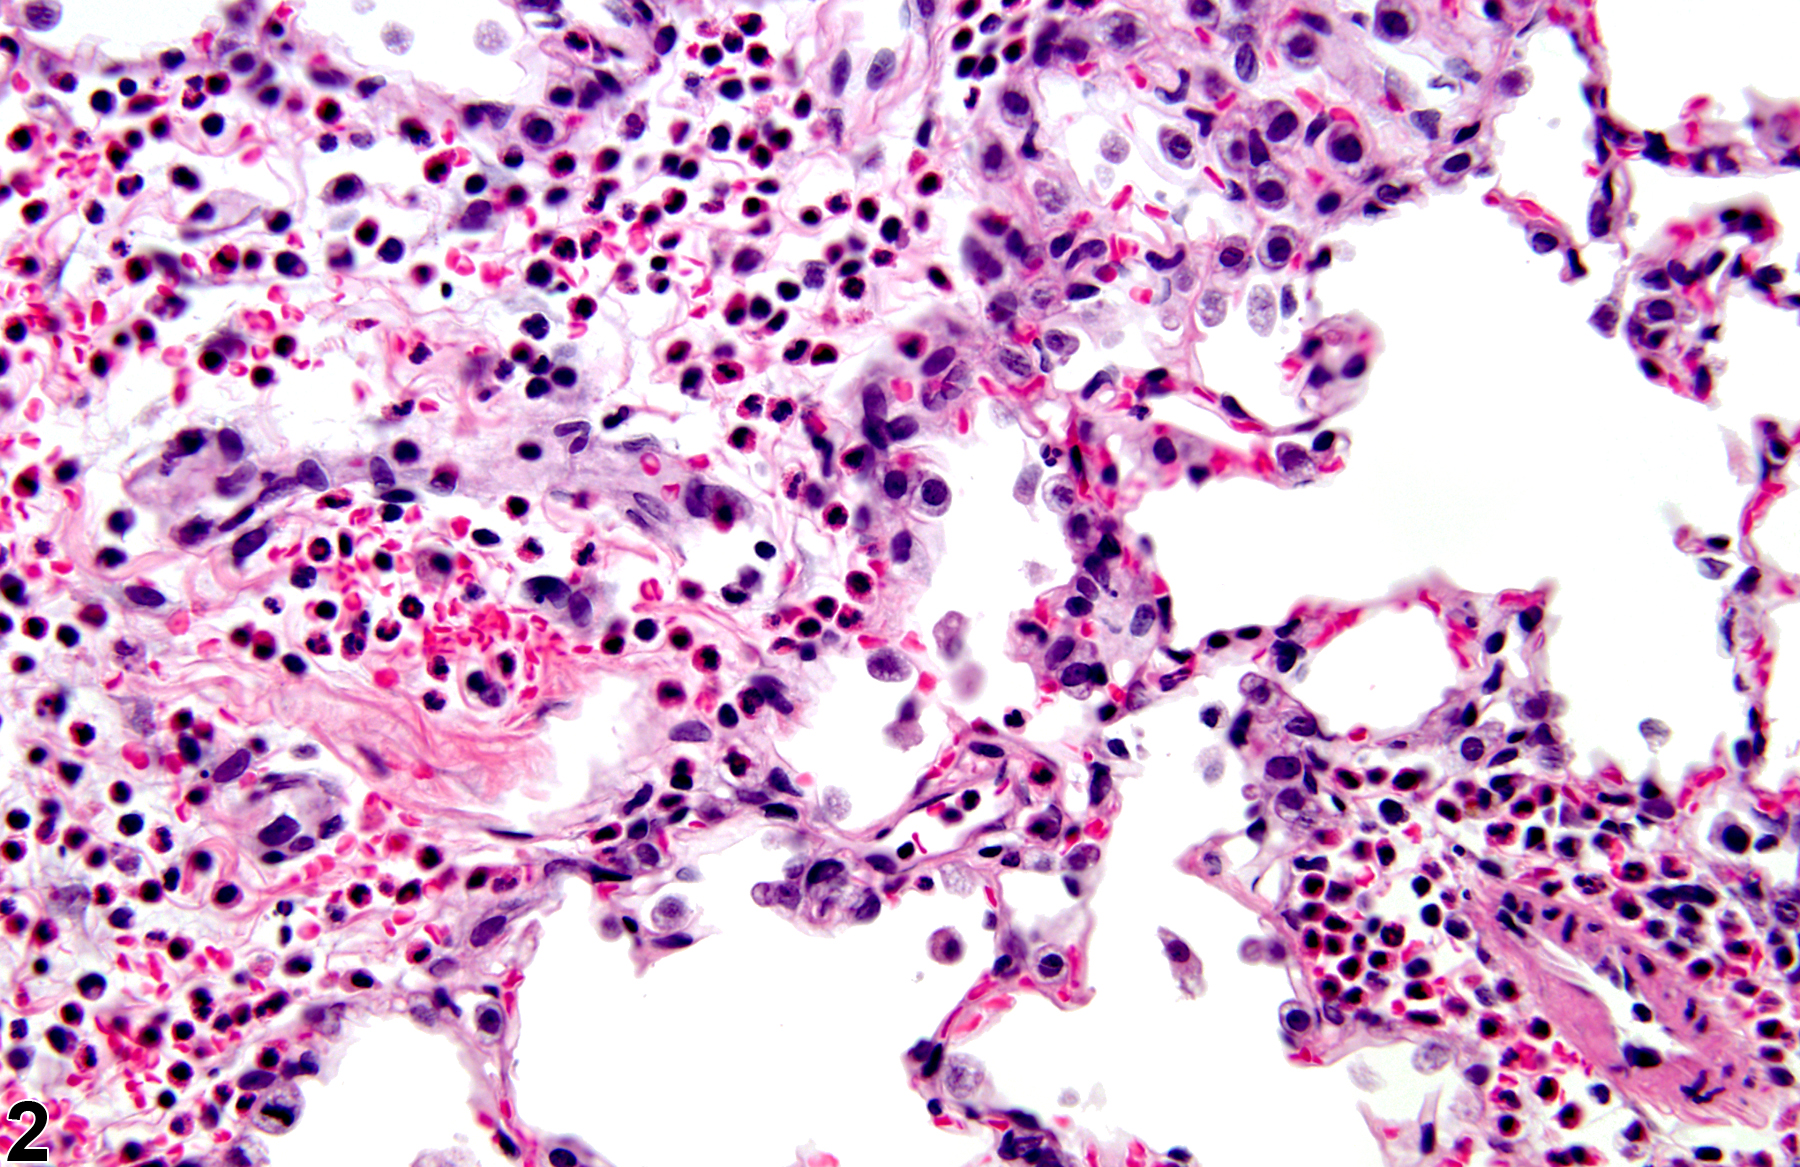 Image of acute inflammation in the lung from a male Wistar Han rat in a subchronic study